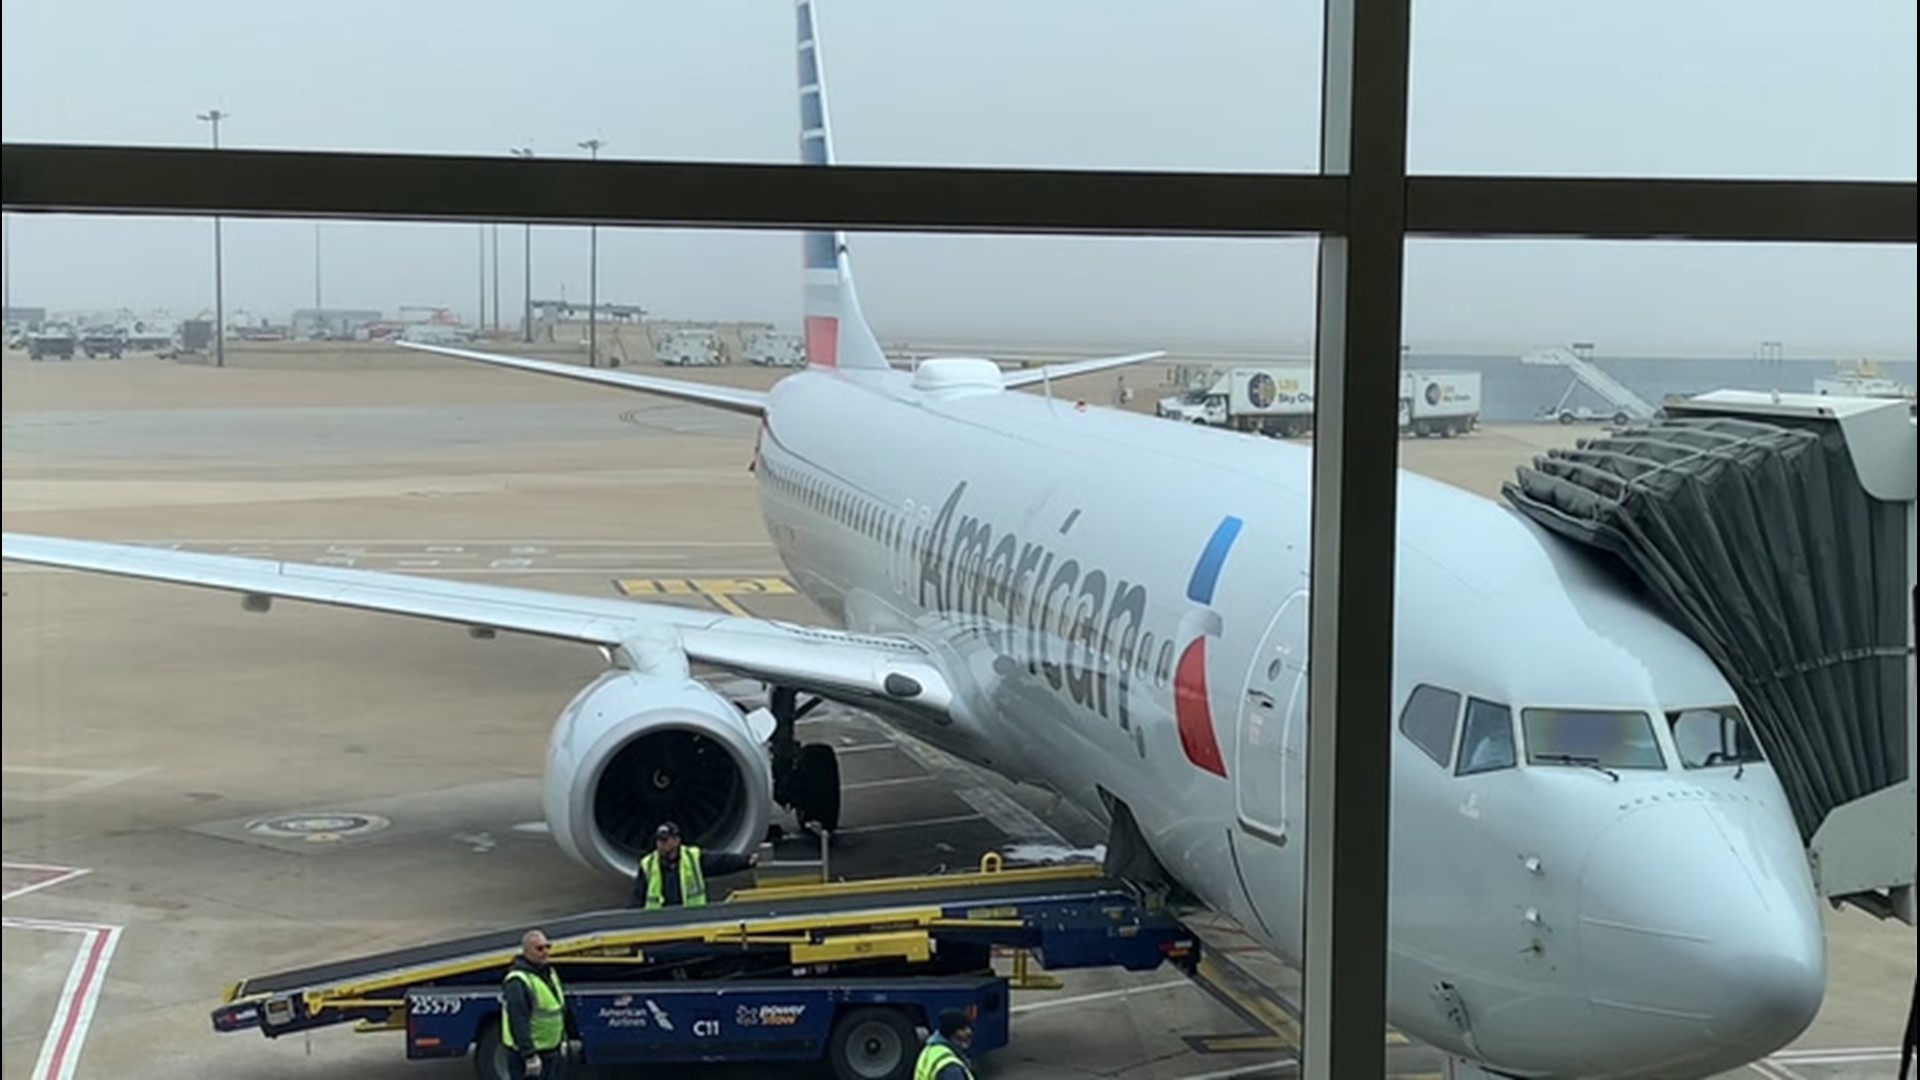 AccuWeather's Bill Wadell found himself stuck at the Dallas/Fort Worth Metroplex in Texas on Jan. 27, with flights being delayed due to dense fog.